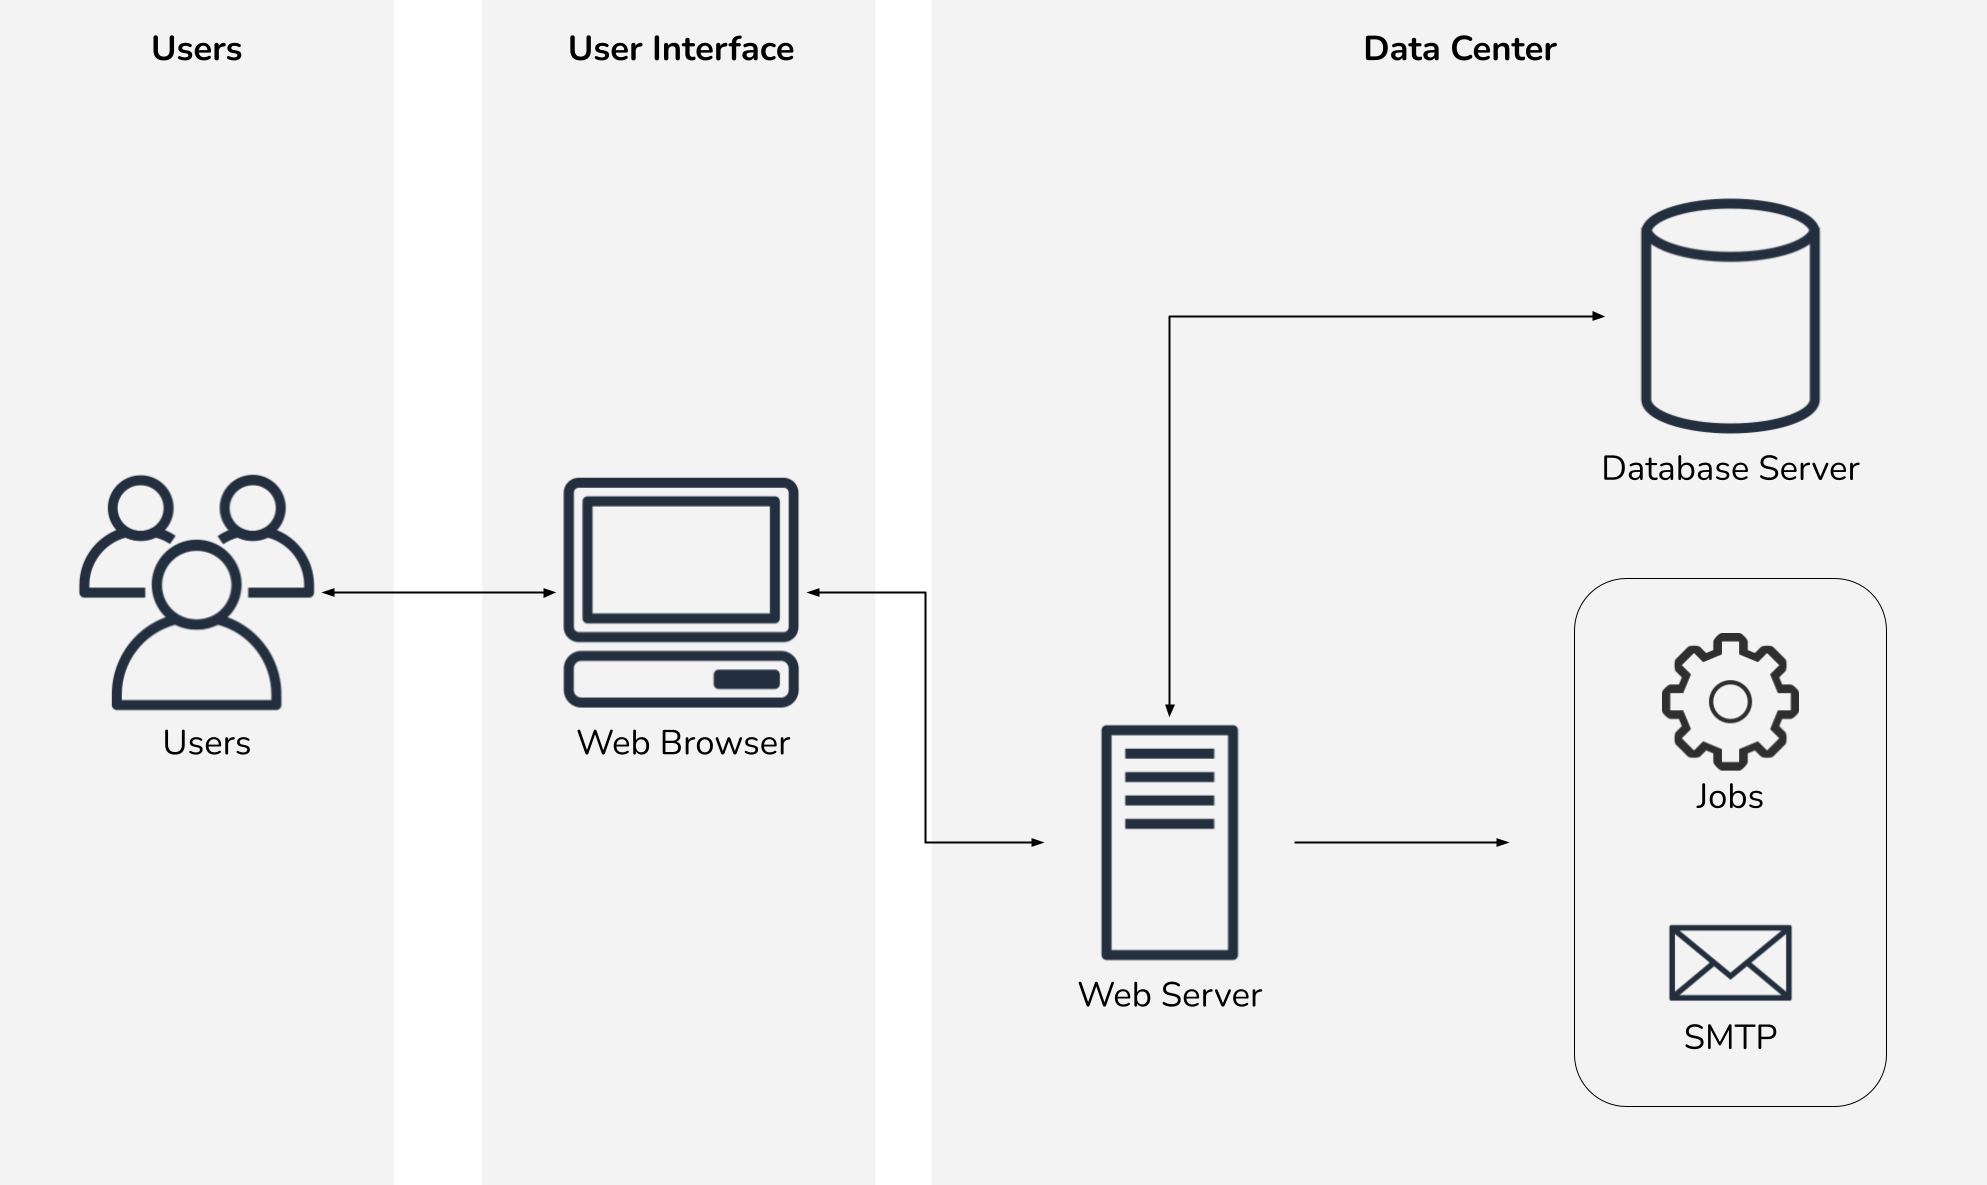 Architecture diagram showing a simple web server and database